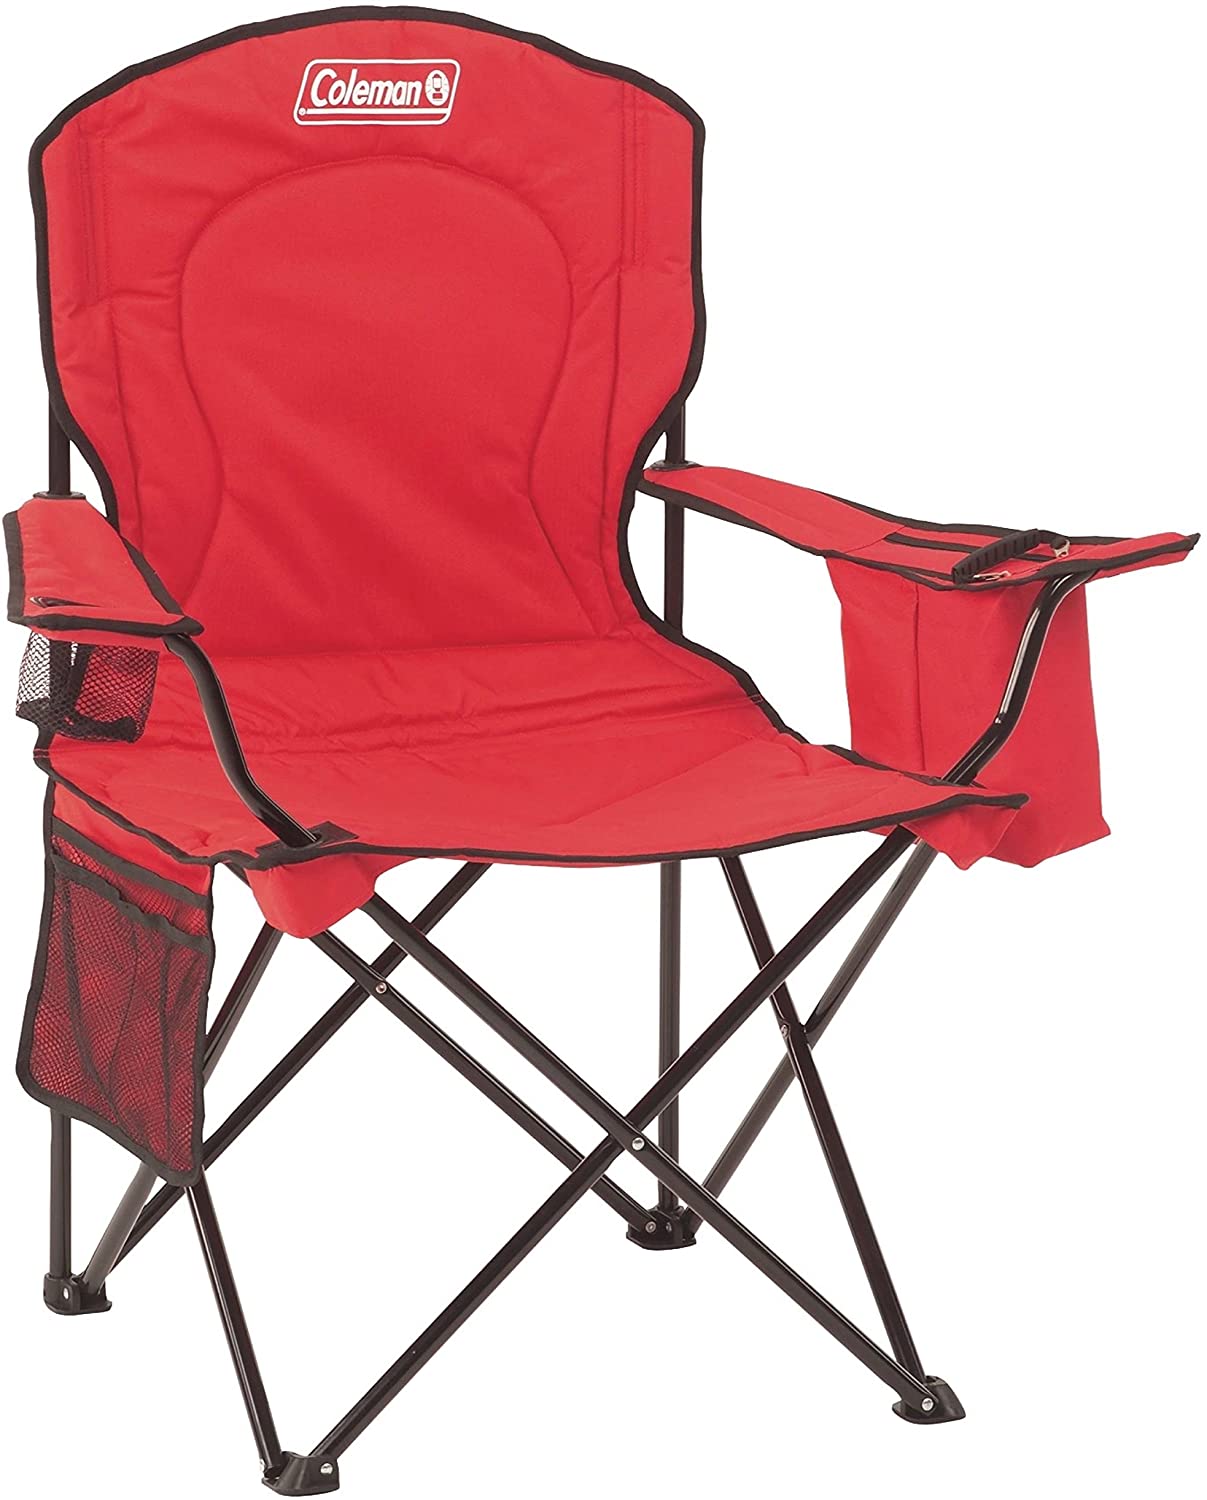 Coleman Camping Chair with Built-in 4 Can Cooler (Black) $21, (Red) $24.30, (Blue) $25.25 + Free Ship w/Prime